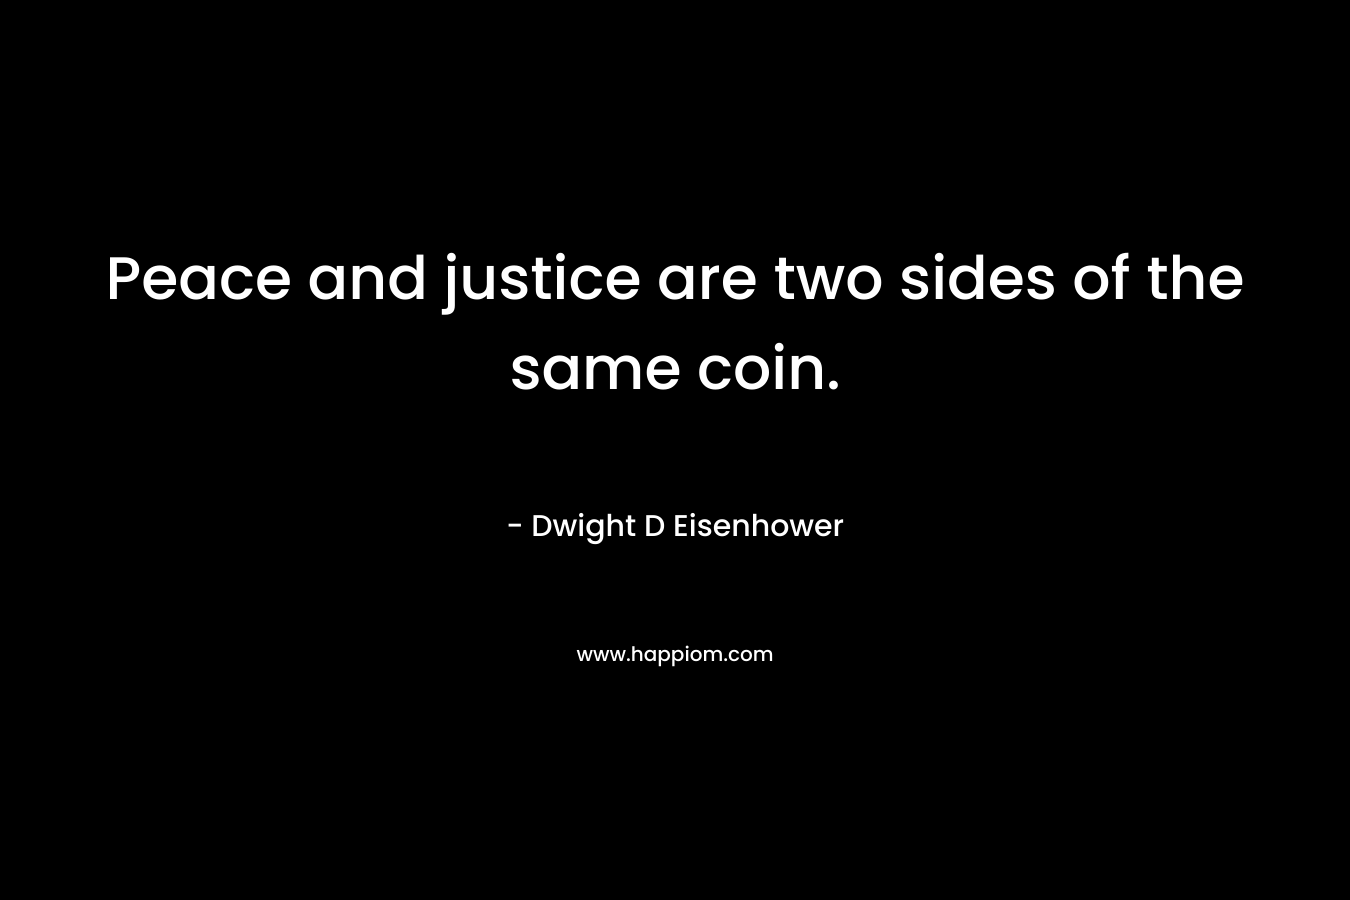 Peace and justice are two sides of the same coin. – Dwight D Eisenhower